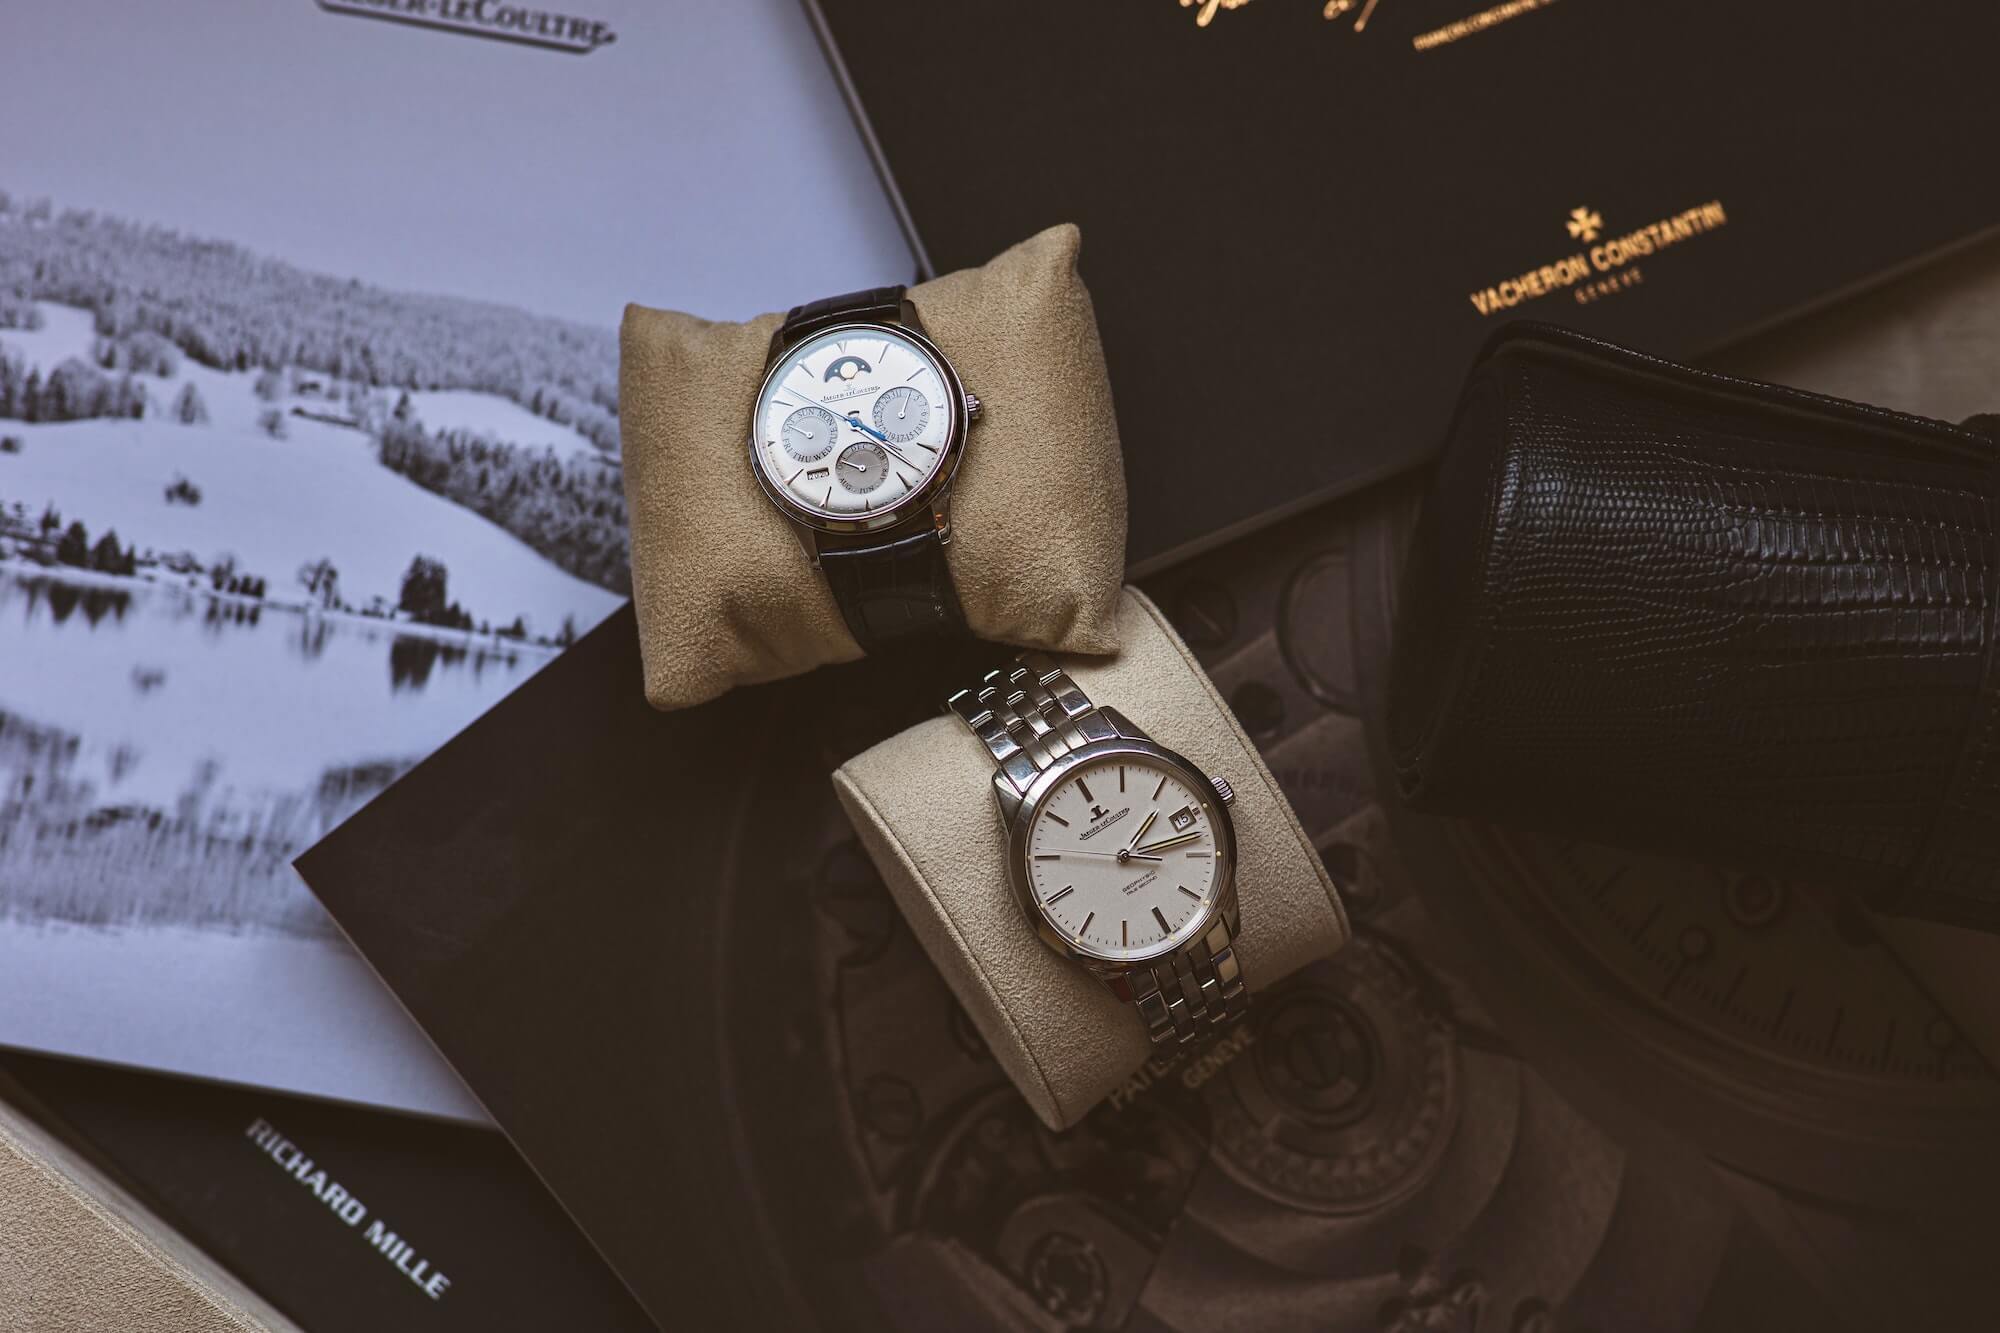 Two Jaeger-LeCoultre watches on cushions